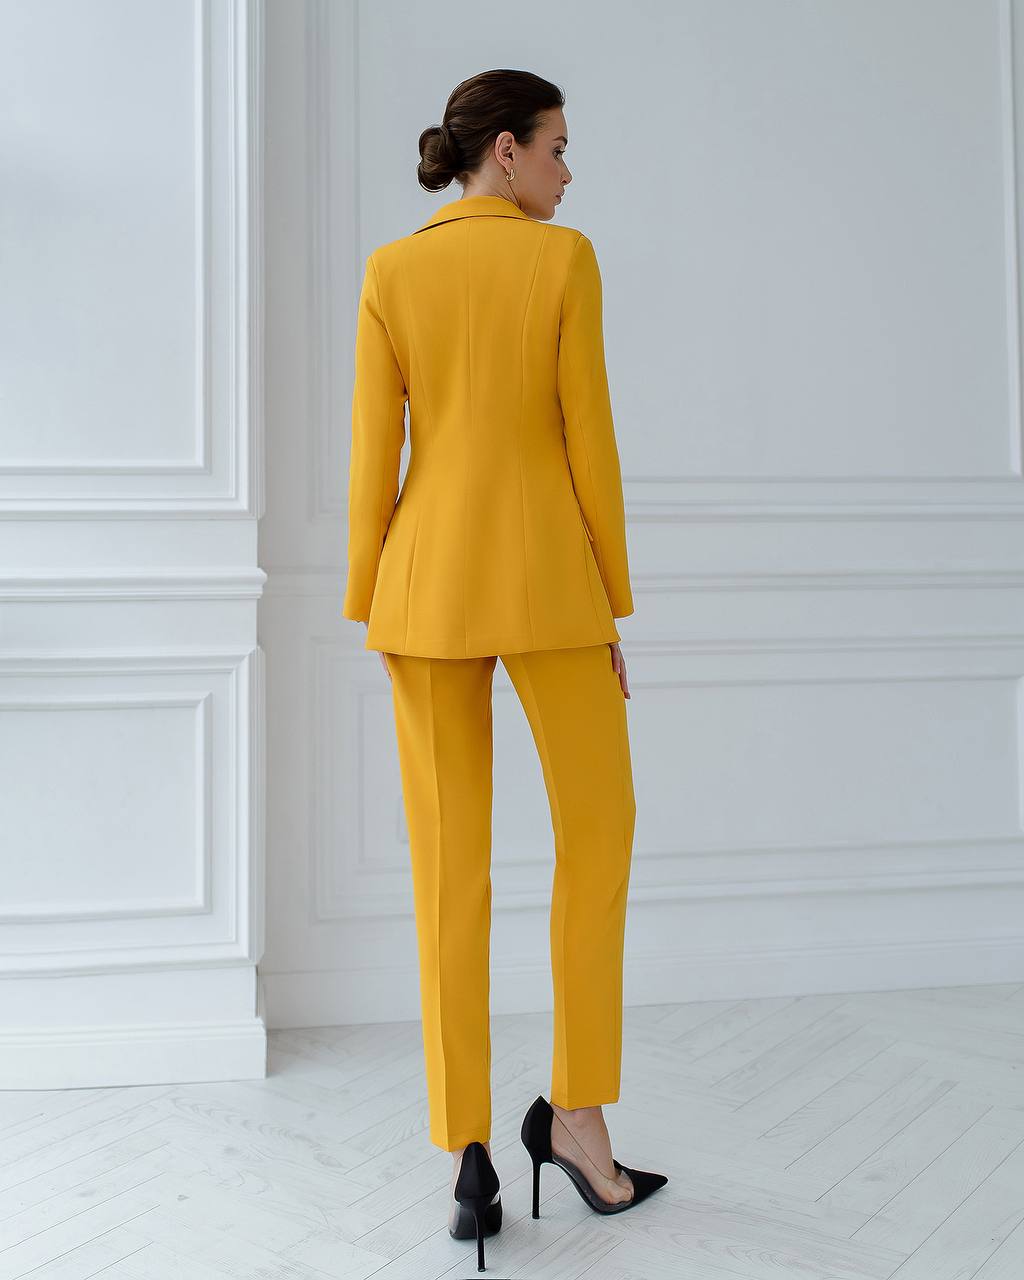 a woman in a yellow suit and high heels